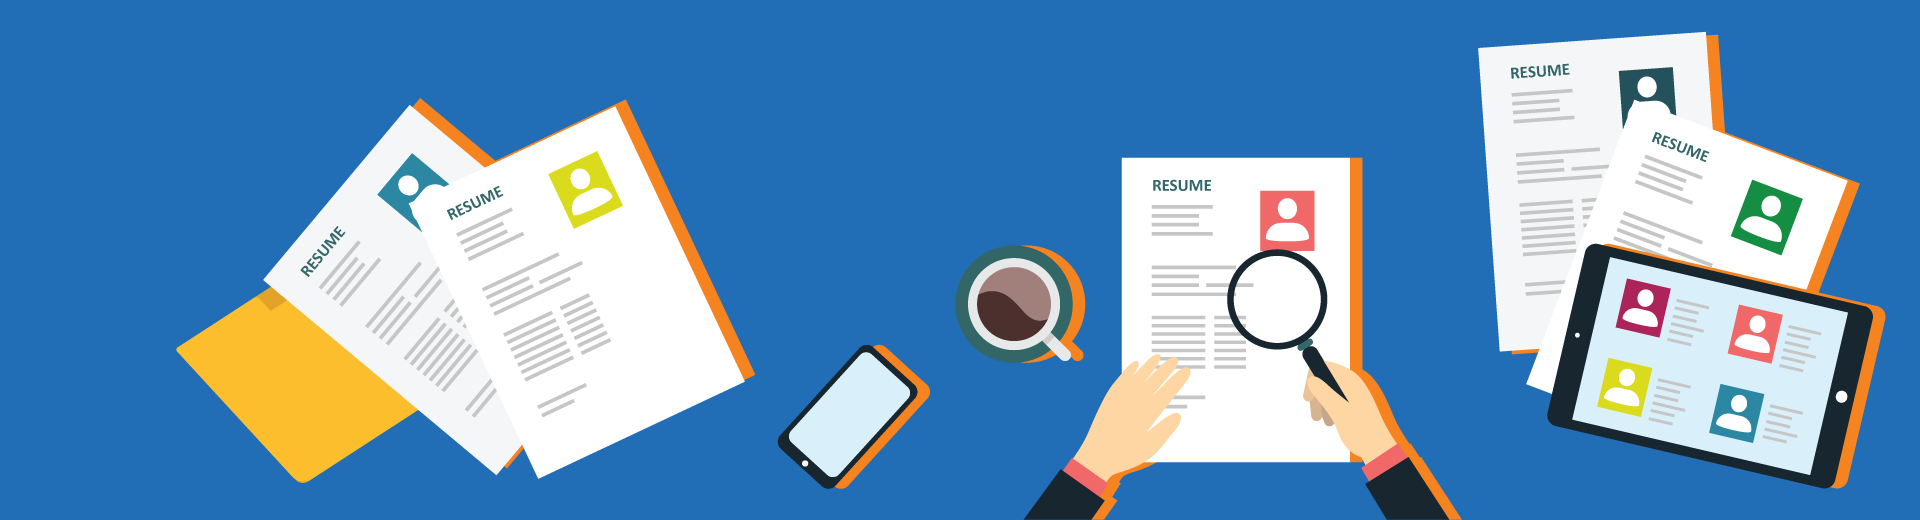 resumes and folders with a person examining a resume